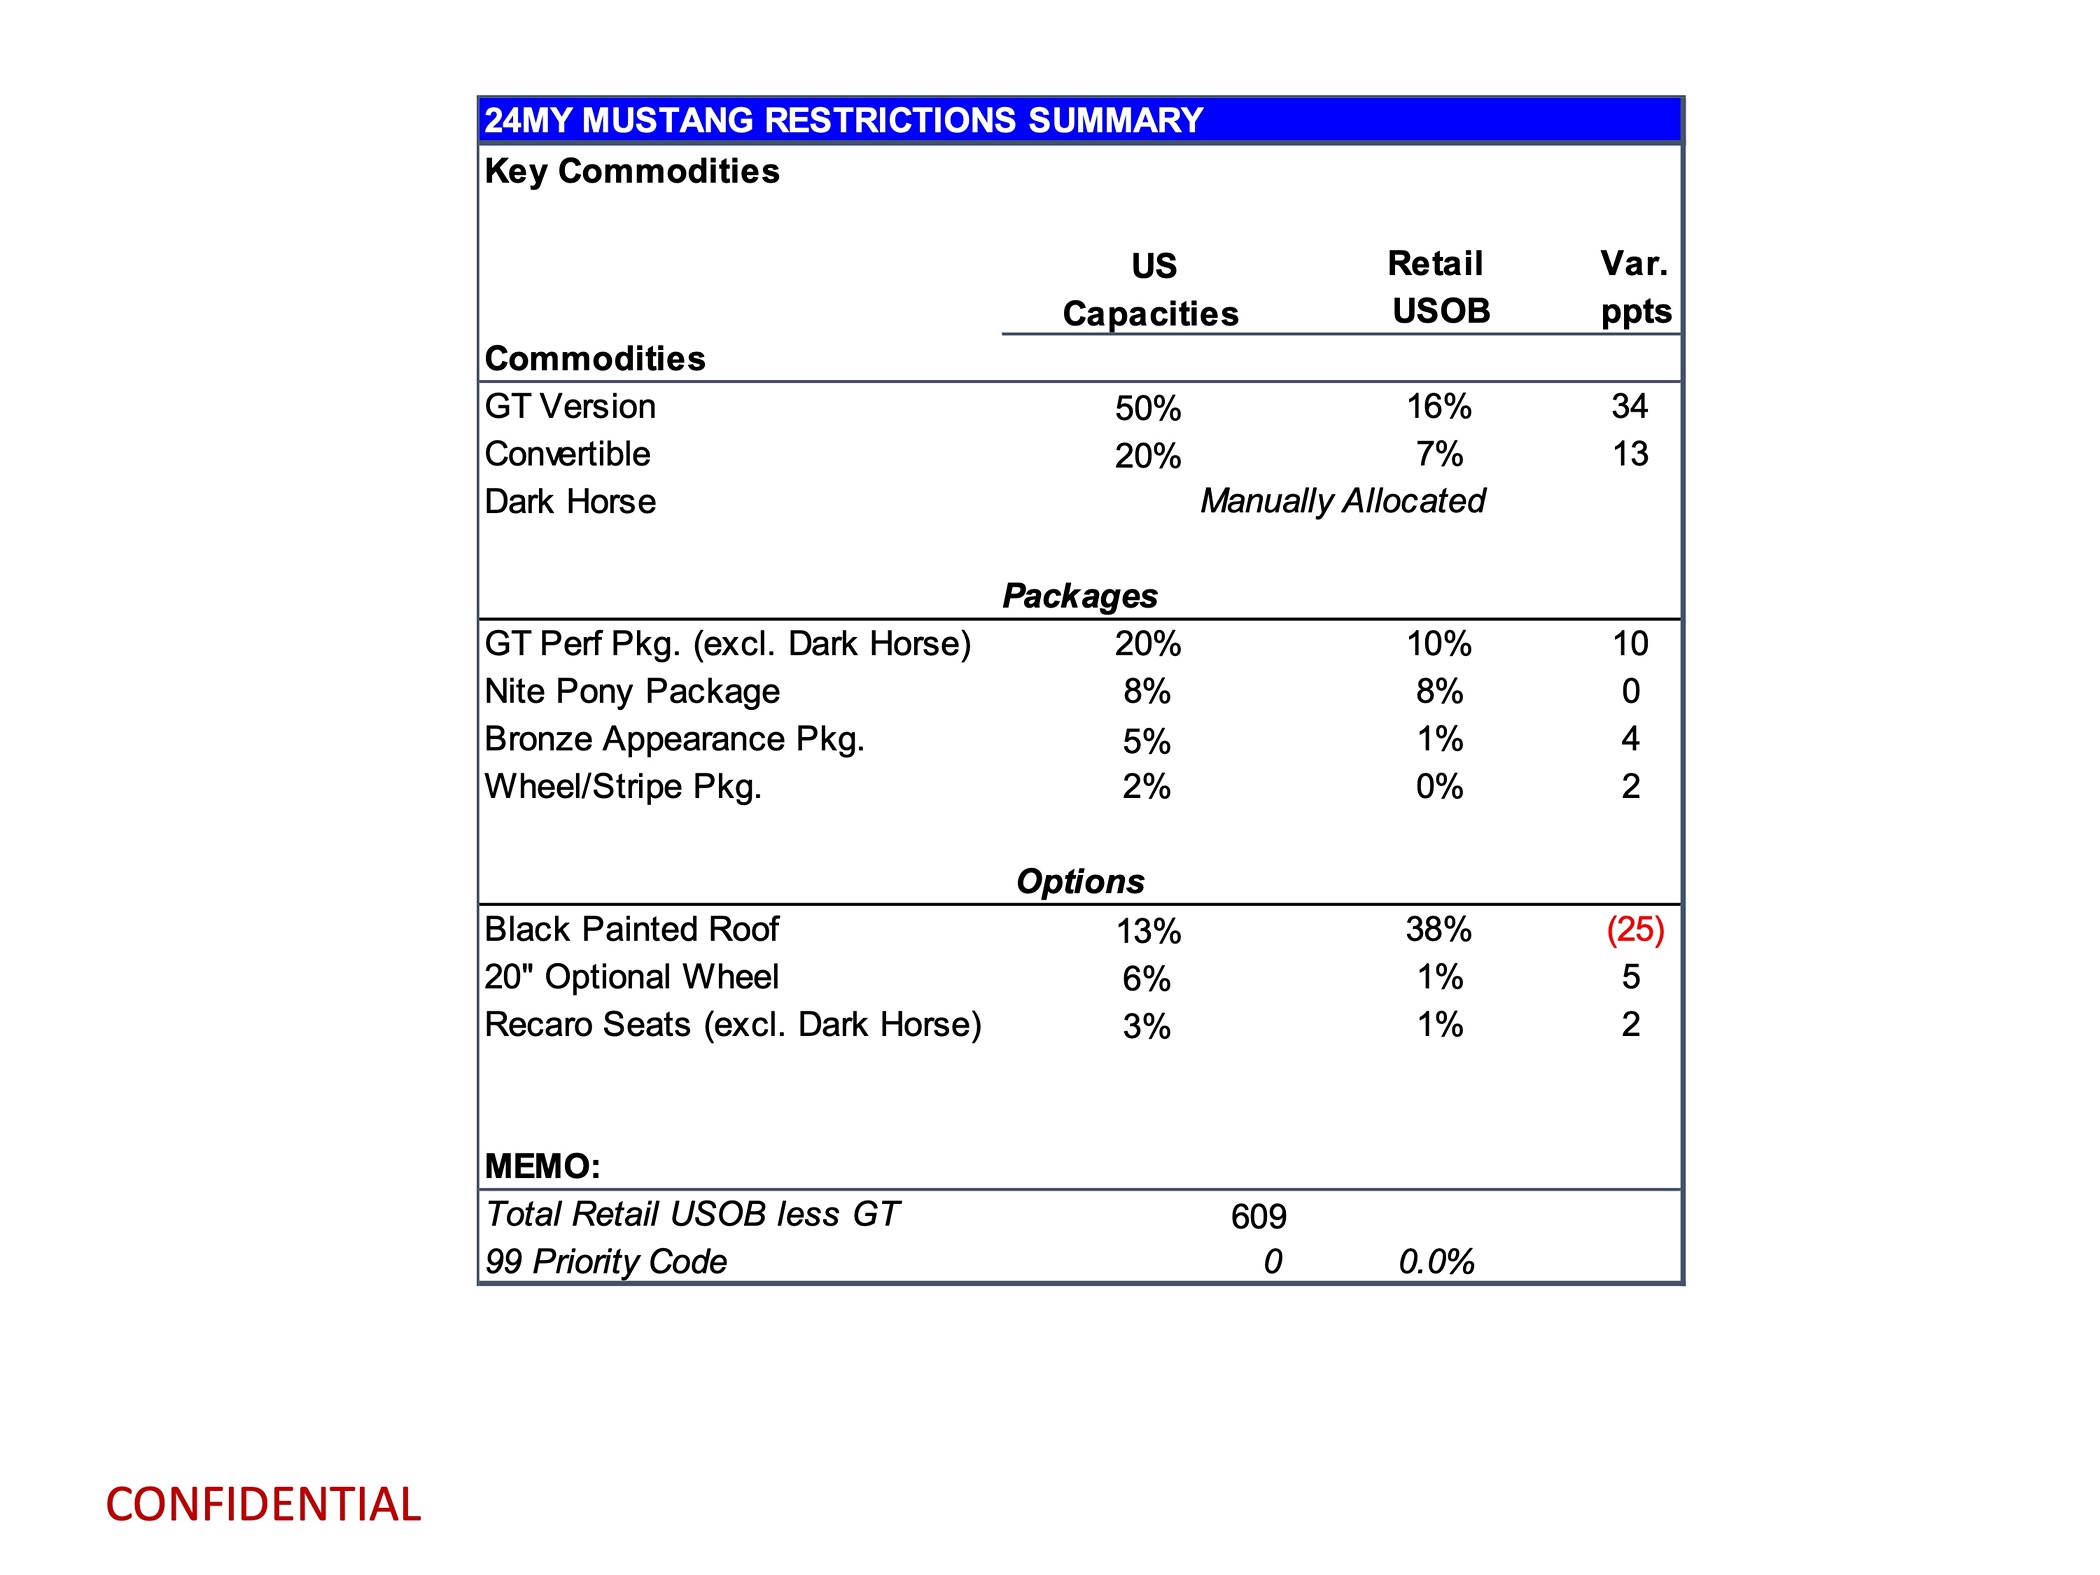 S650 Mustang Latest 2024 Mustang Production Key Commodity Constraints + Total Retail Unscheduled Orders (4/22/24) page 3